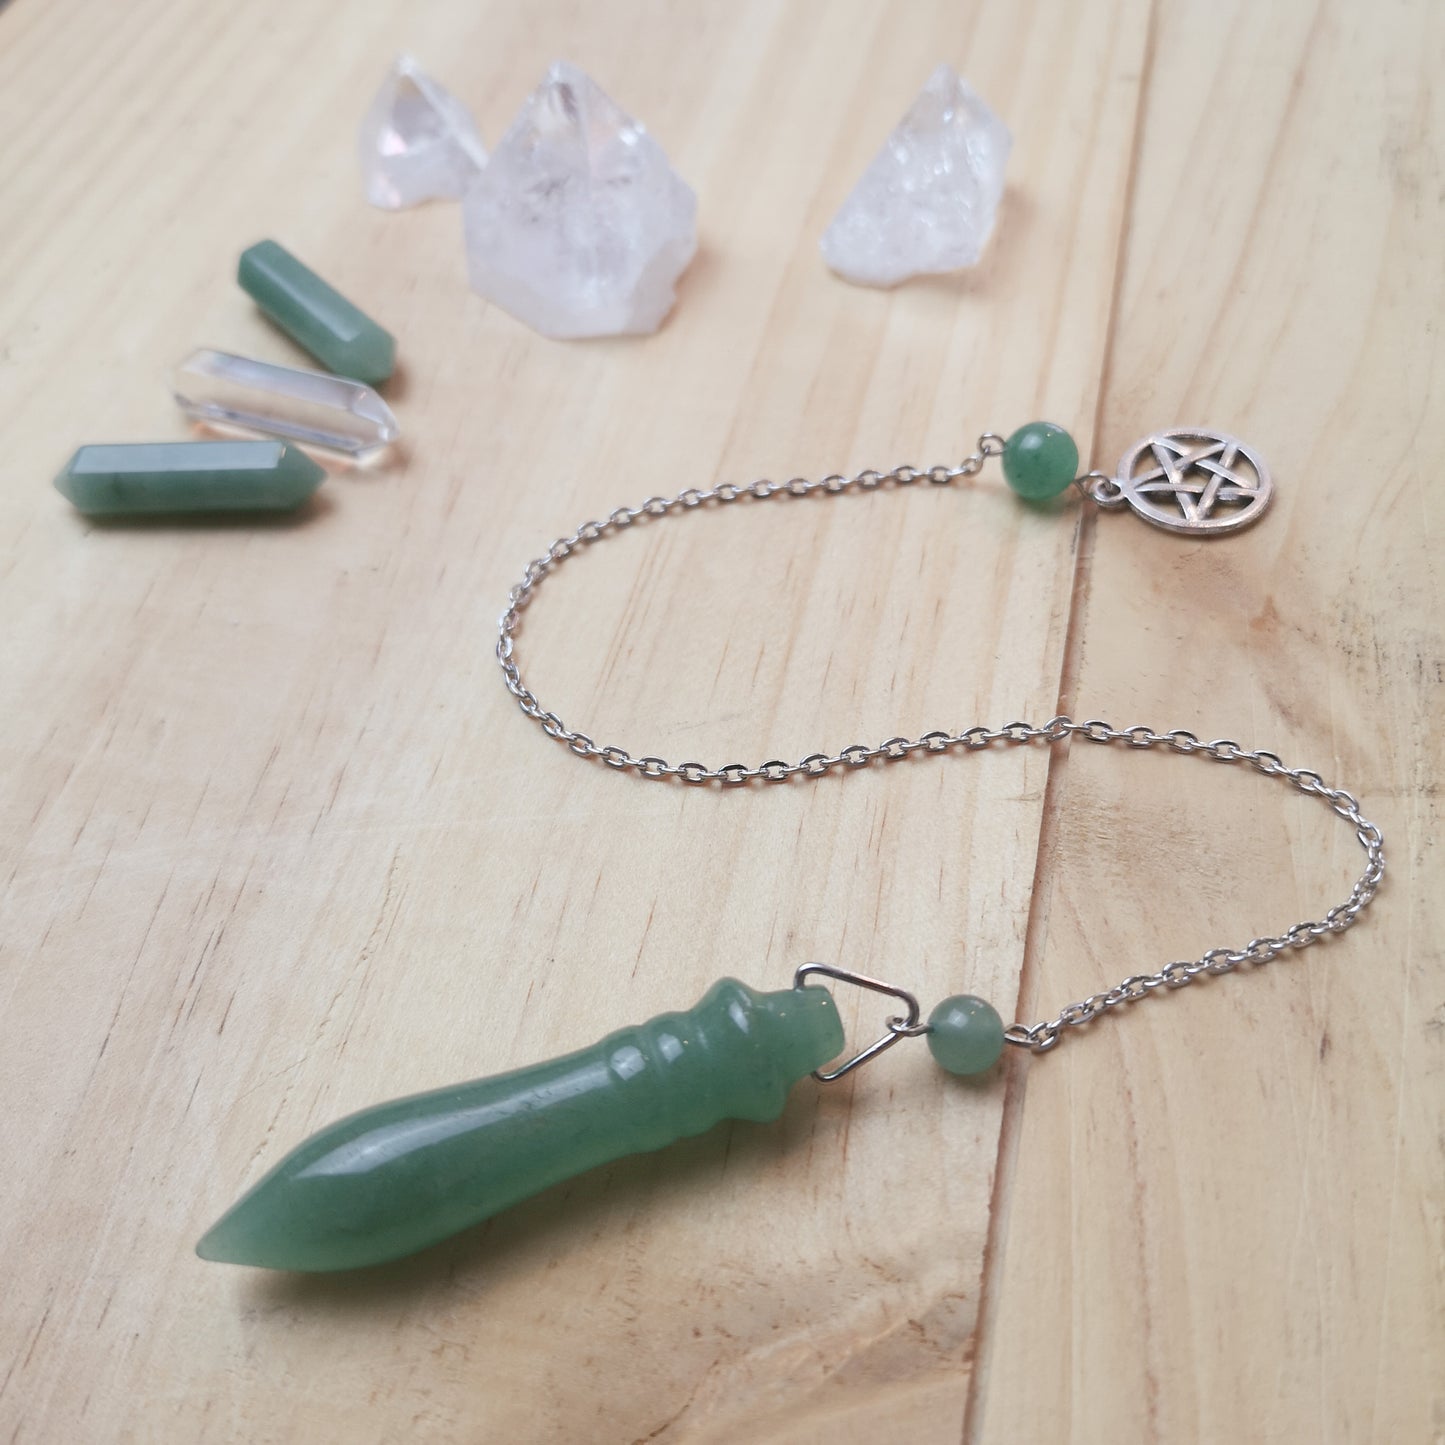 Egyptian Thot pendulum aventurine and pentacle - The French Witch shop